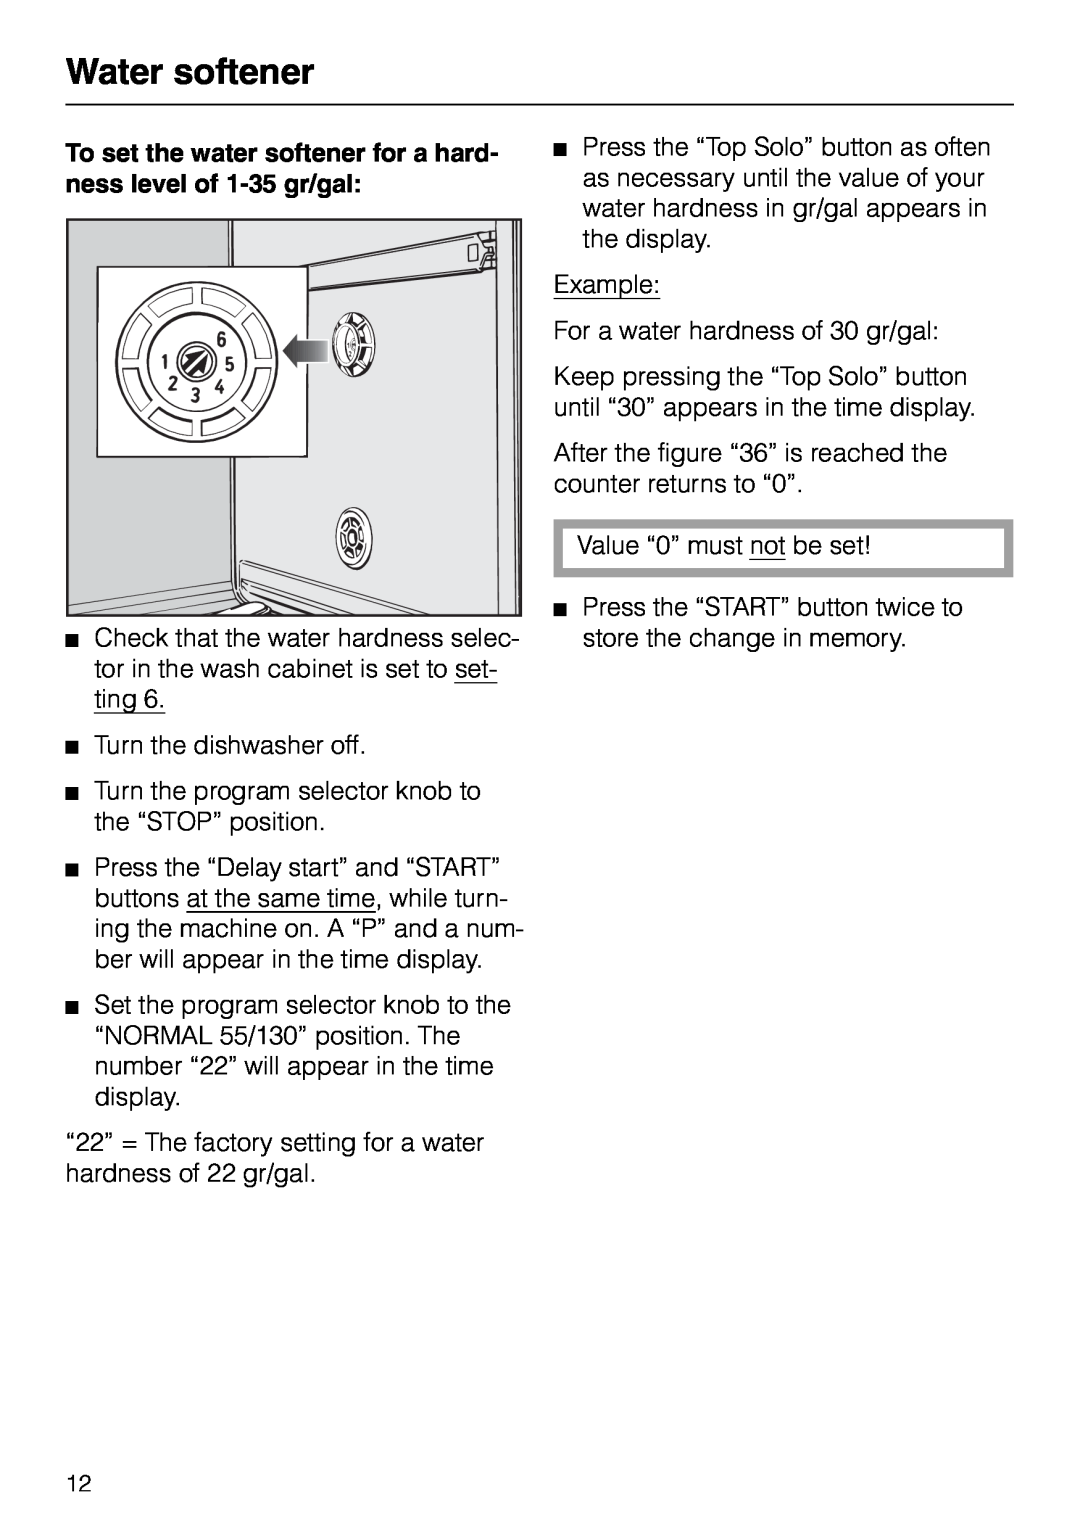 Miele M.-NR. 04 390 922 operating instructions Water softener, Turn the dishwasher off 